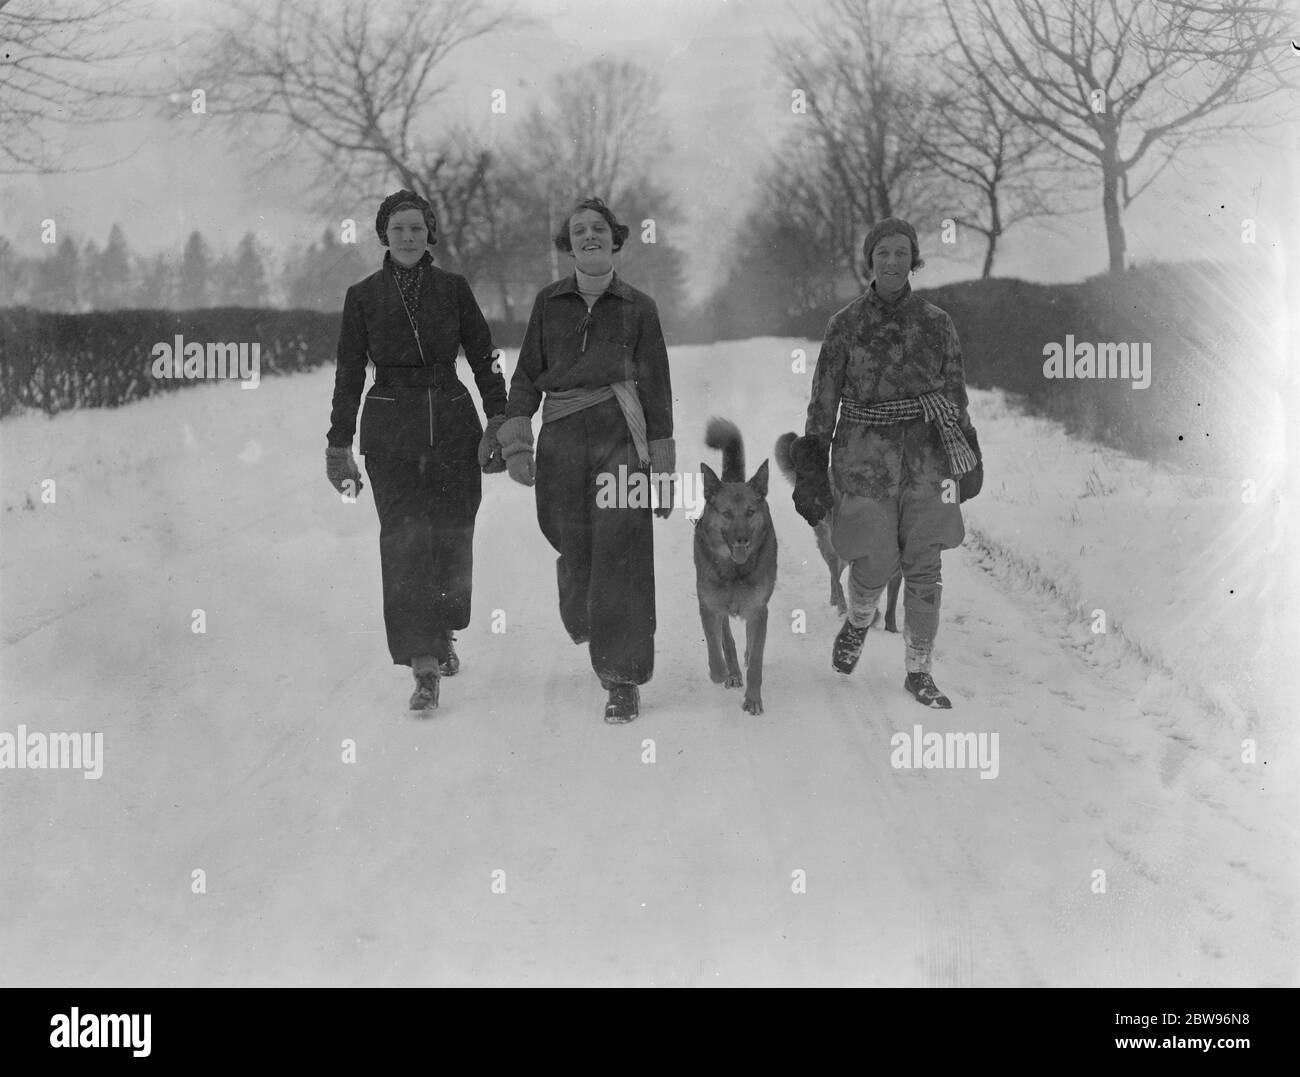 Winter sports fashion in Surrey , Mrs Freshfield ( right ) with her daughter Miss Zoe Freshfield ( centre 0 and Miss Norah Taylor in the latest in winter sports costumes off to enjoy a run in the snow on the slopes of the Surrey Hills near Reigate . 11 February 1932 Stock Photo